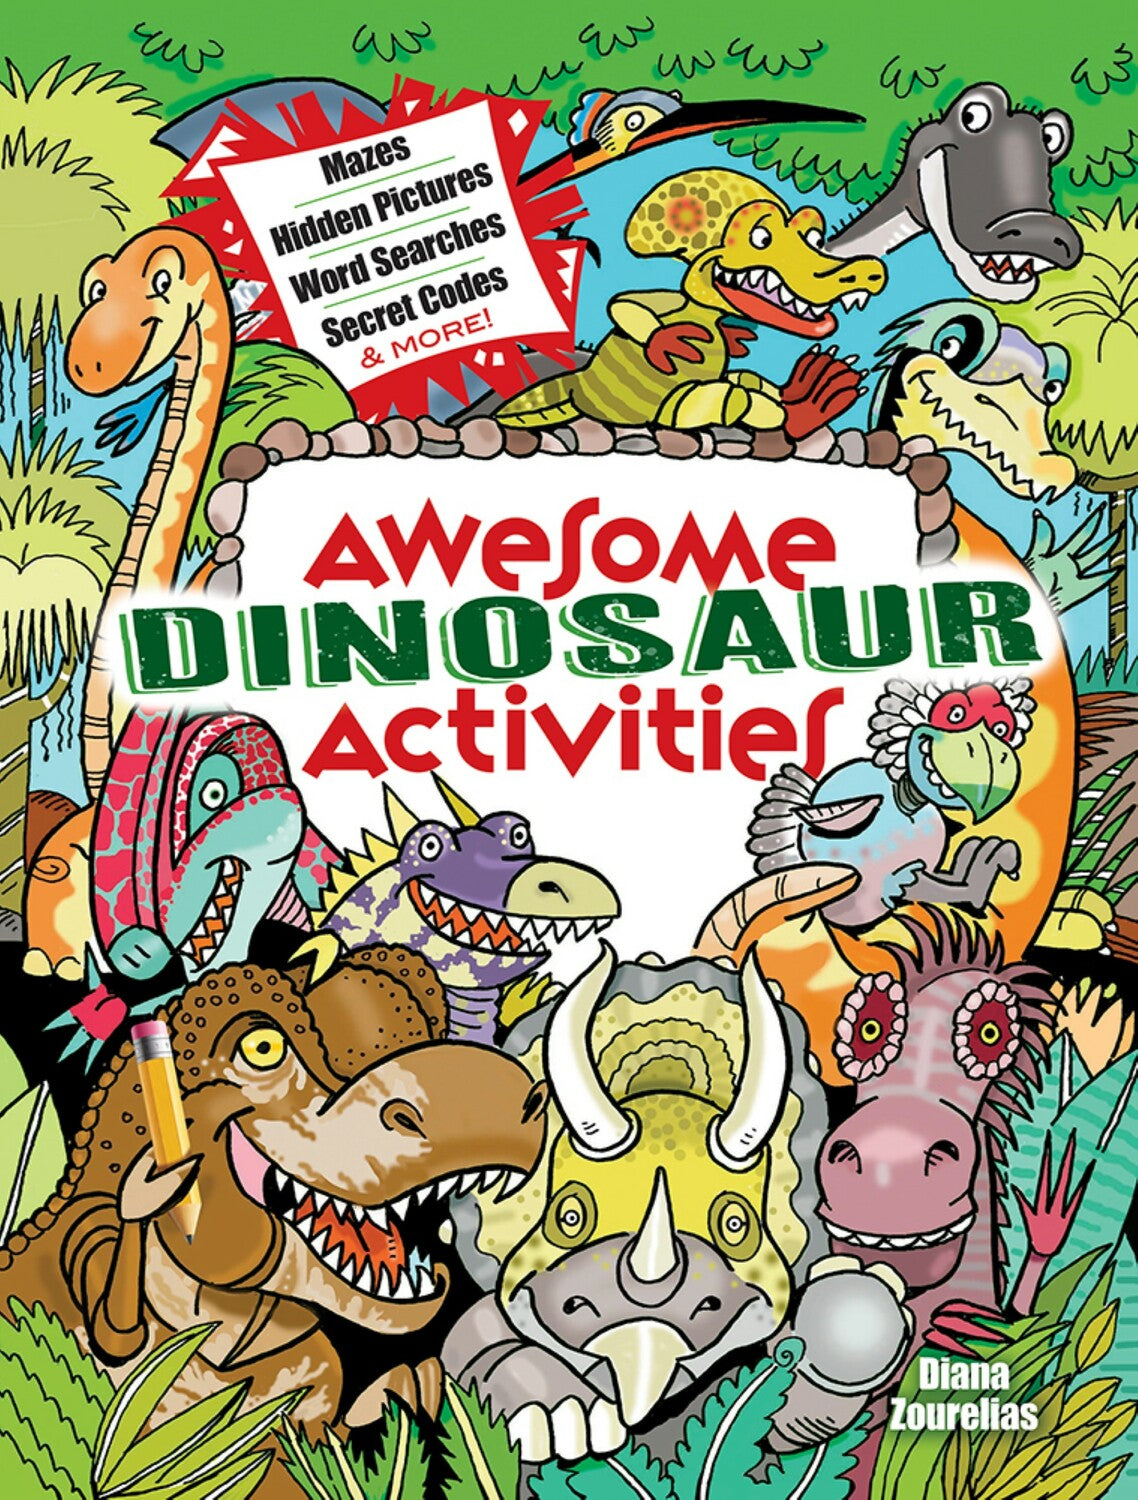 Awesome Dinosaur Activities: Mazes, Hidden Pictures, Word Searches, Secret Codes, Spot the Differences, and More!